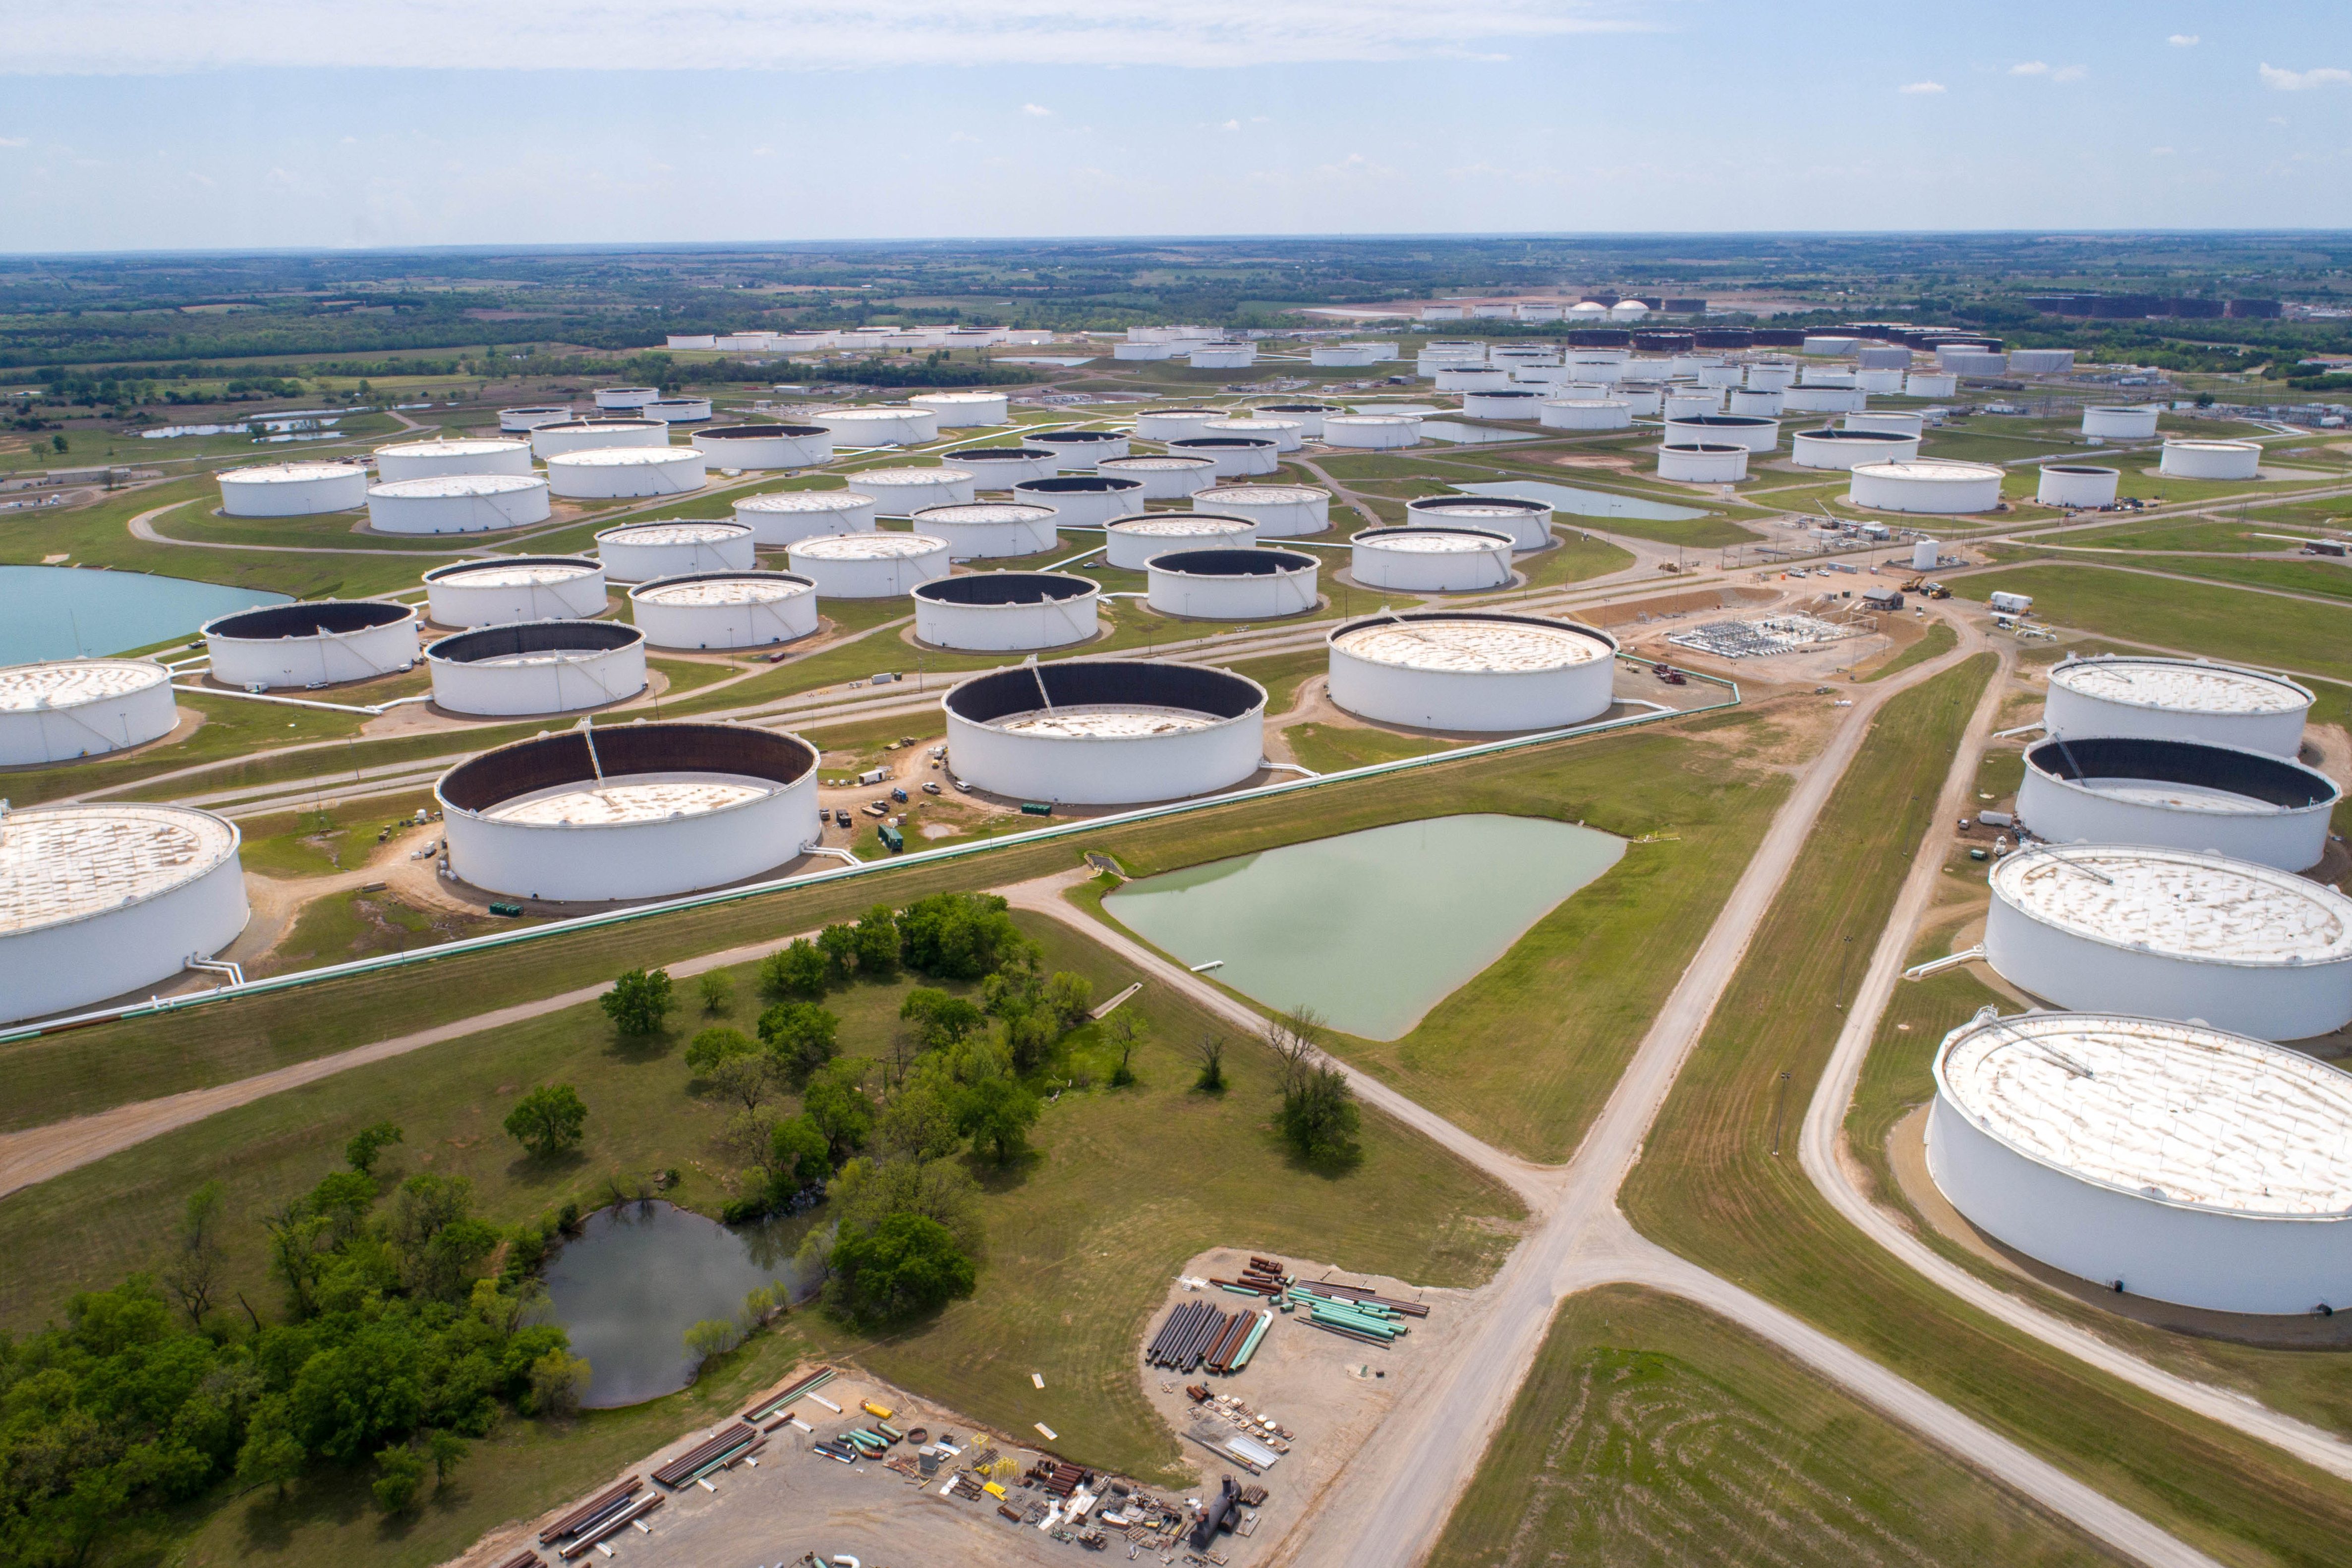 Crude oil storage tanks are seen in an aerial photograph at the Cushing oil hub in Cushing, Oklahoma, U.S. April 21, 2020. REUTERS/Drone Base